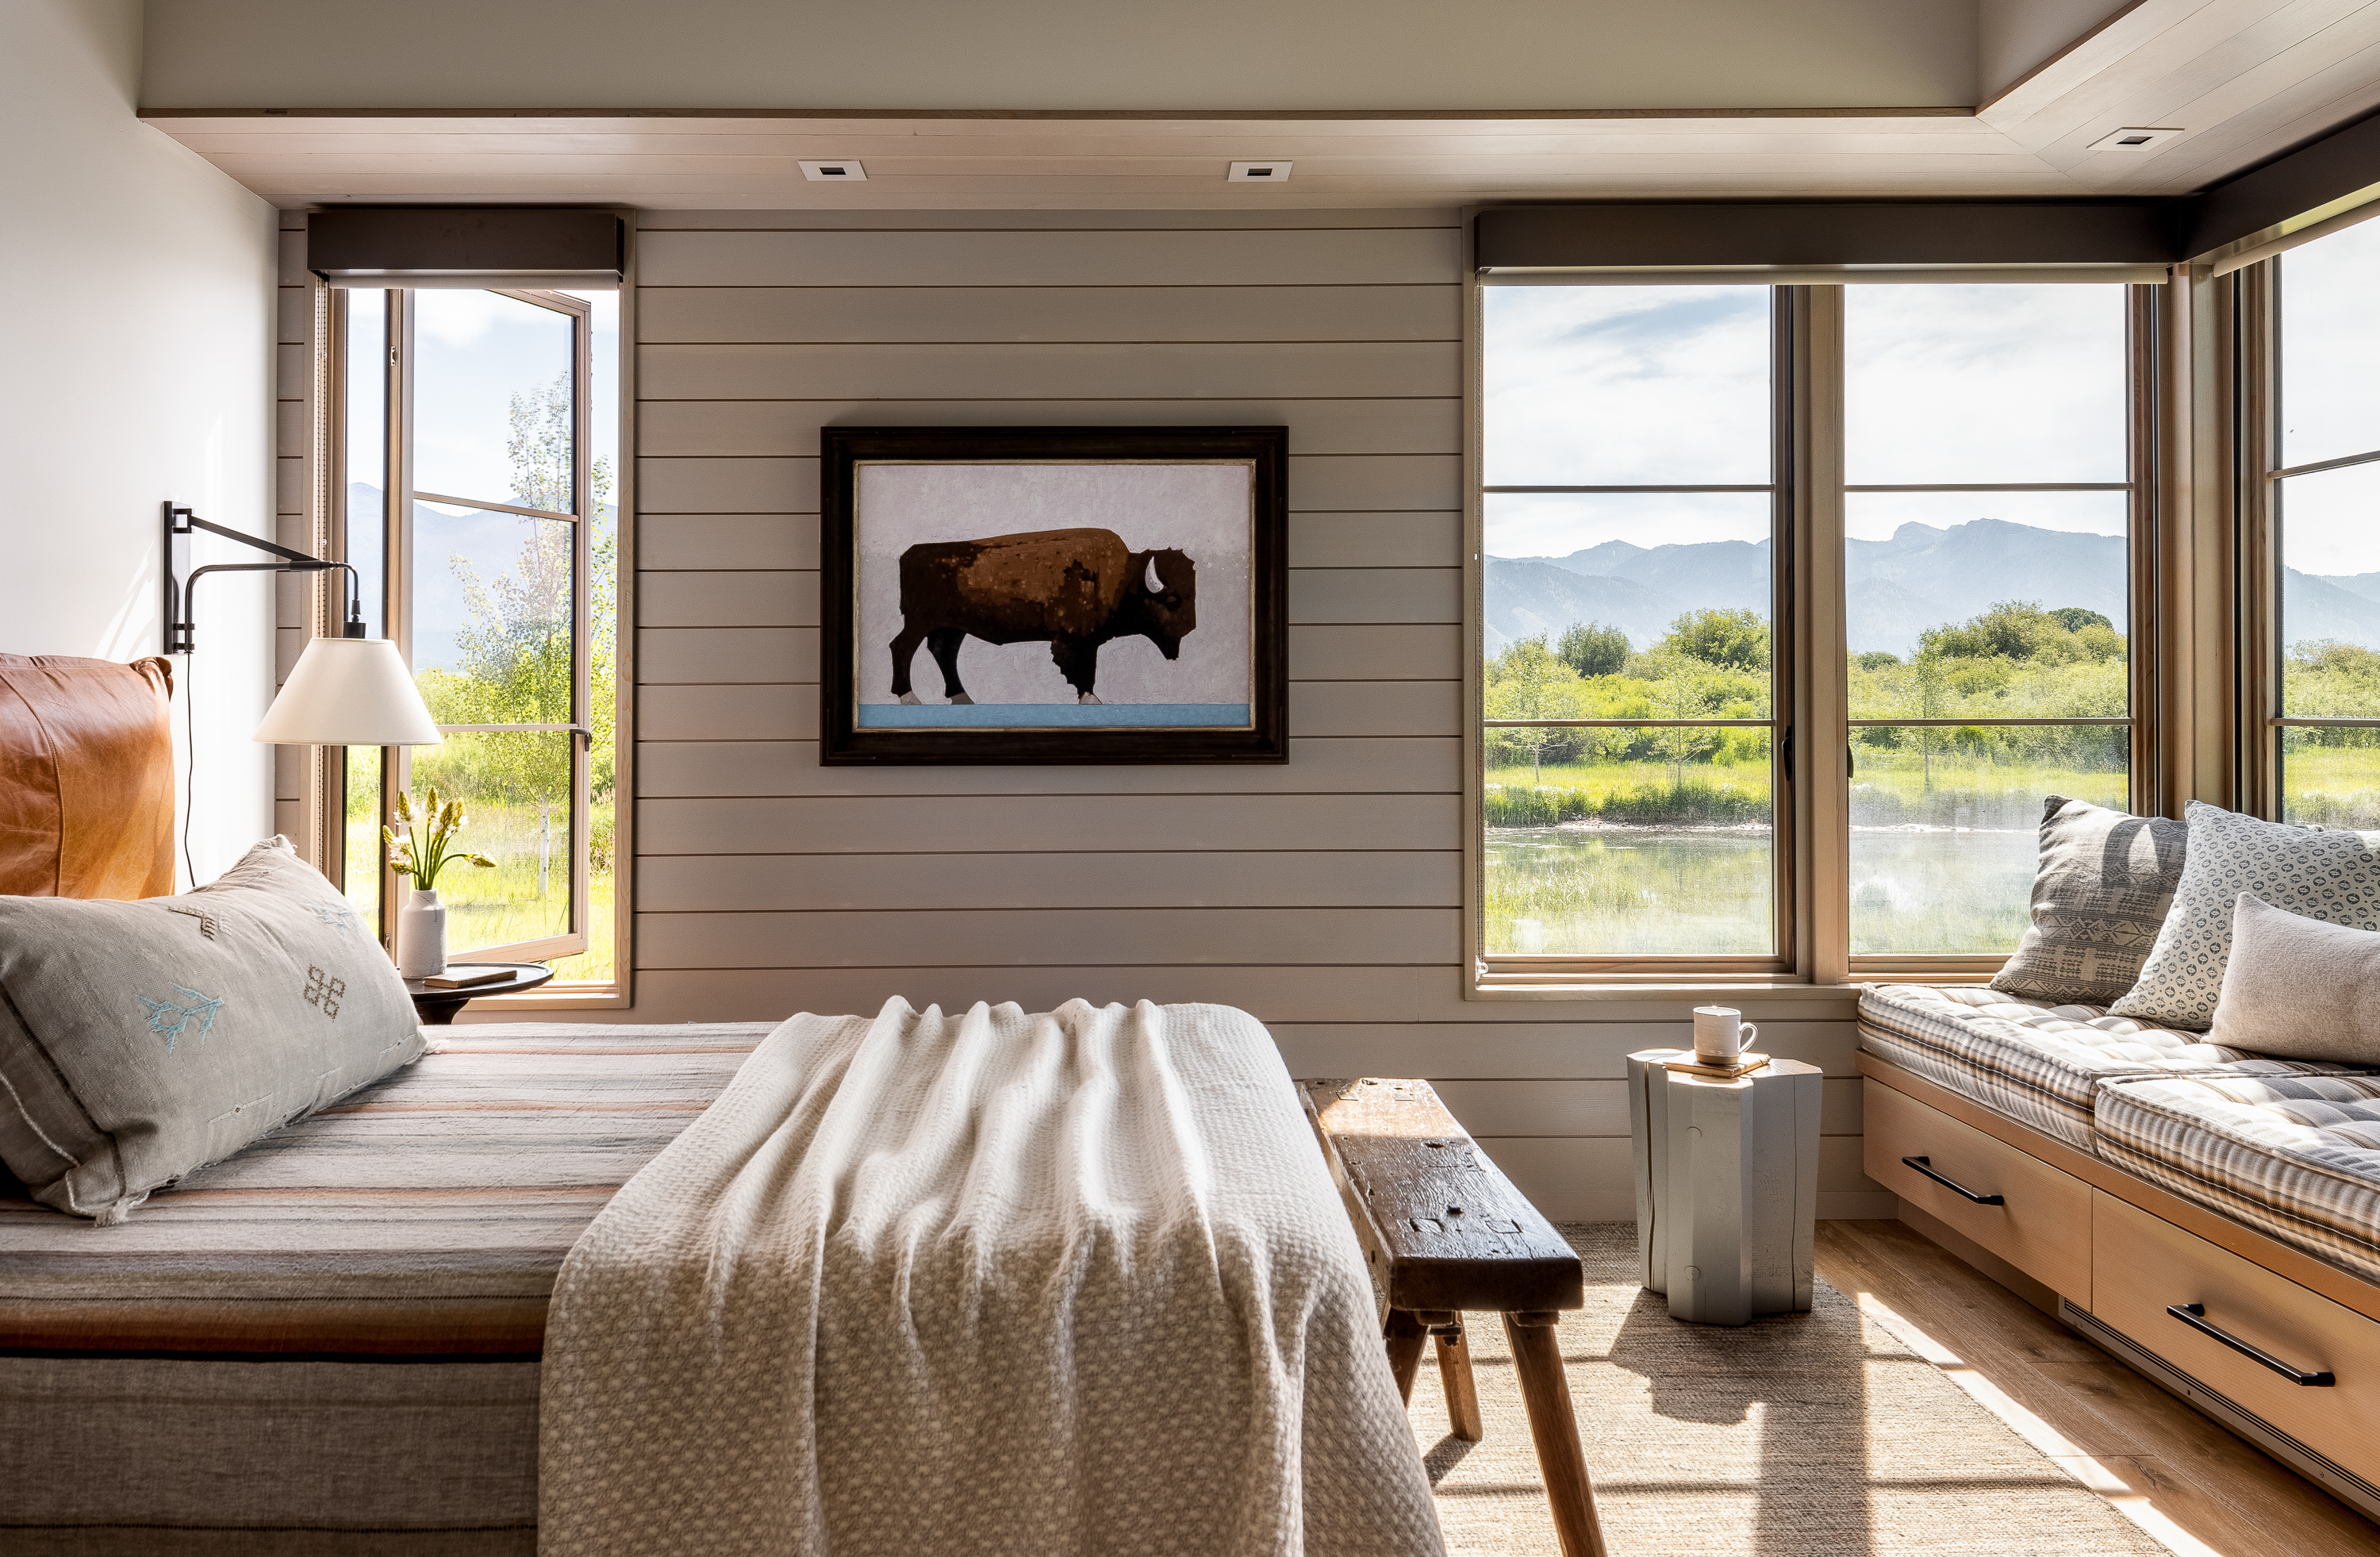 Natural wood panel bedroom, leather headboard bed, and built-in window seat with views of Wyoming landscape.